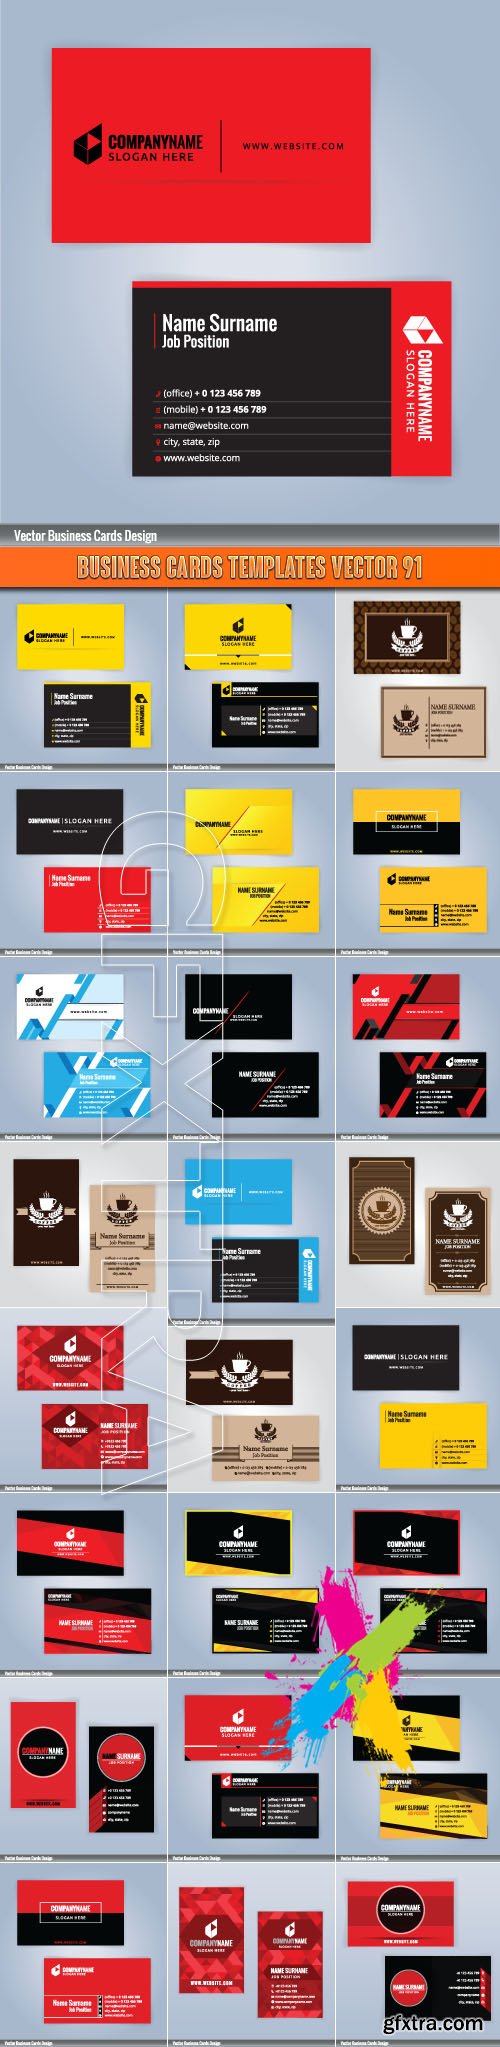 Business Cards Templates vector 91